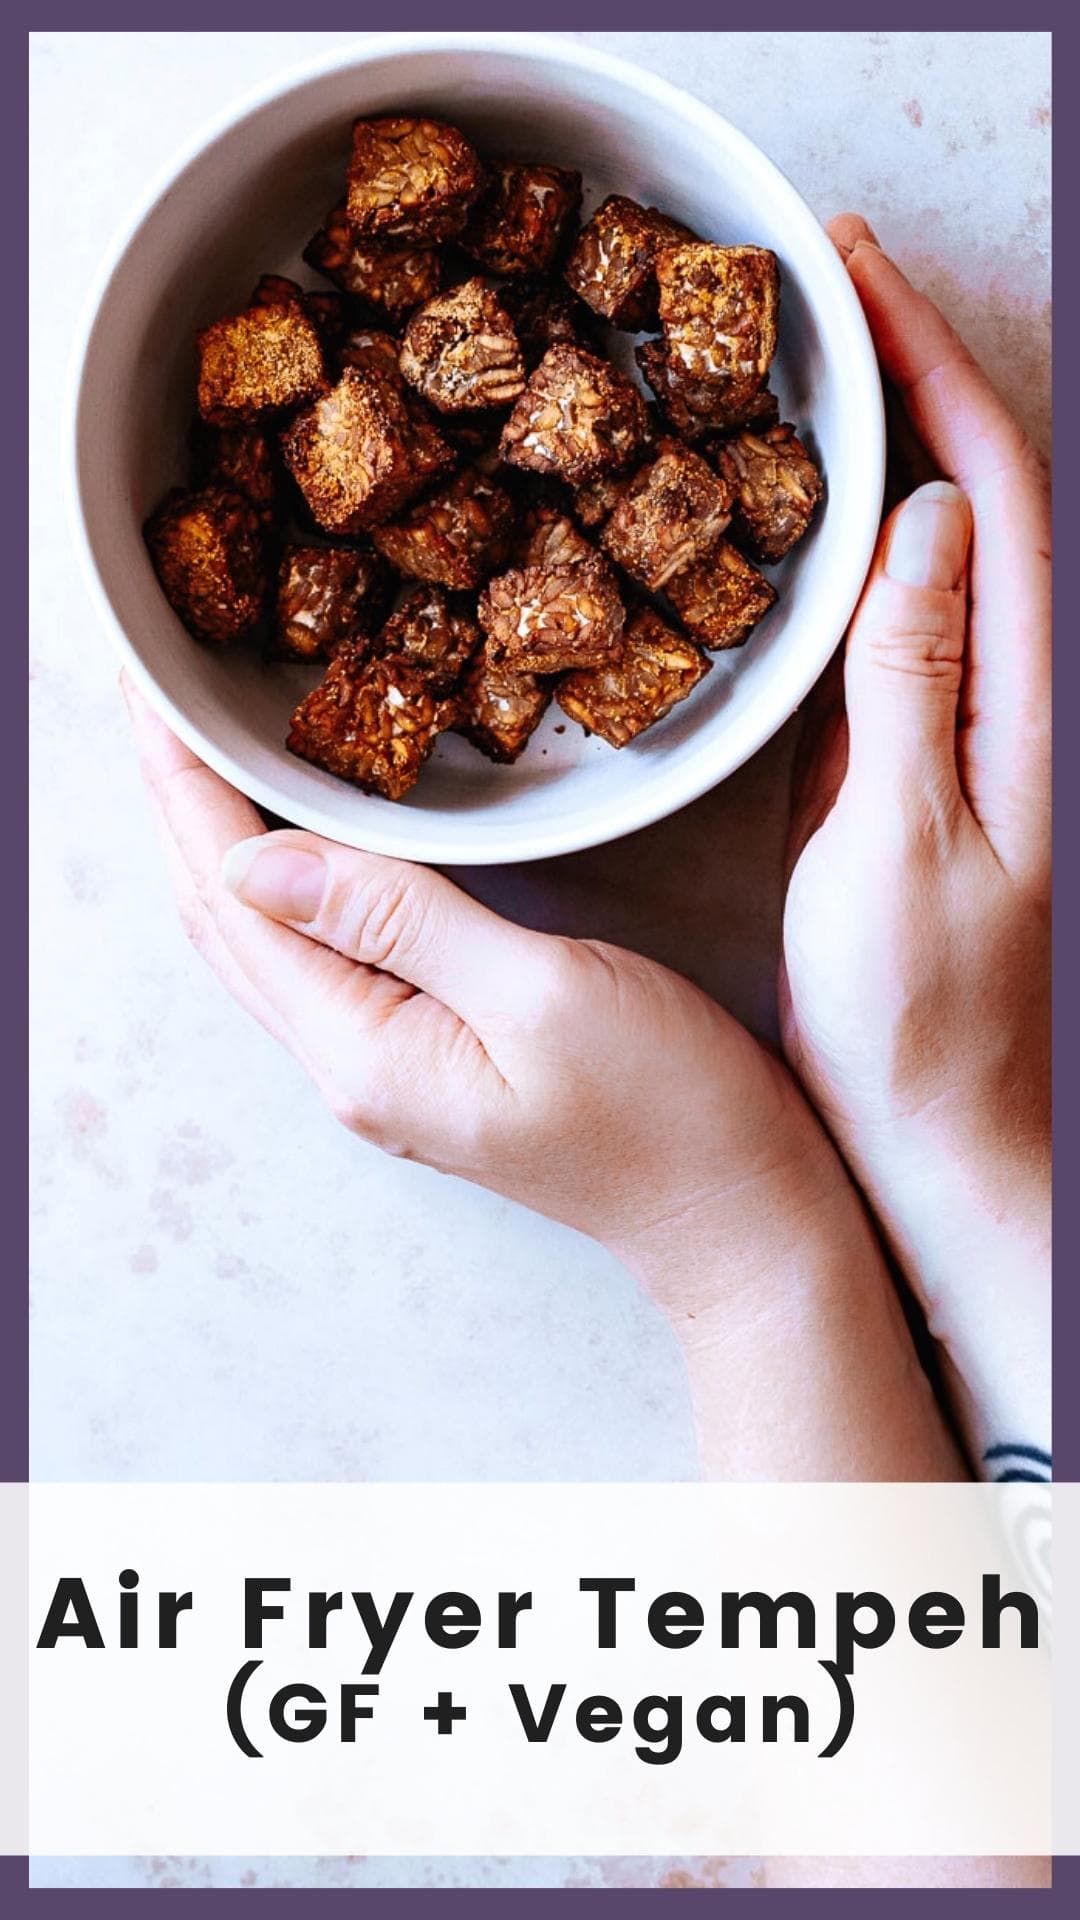 Crispy Air Fryer Tempeh - MOON and spoon and yum